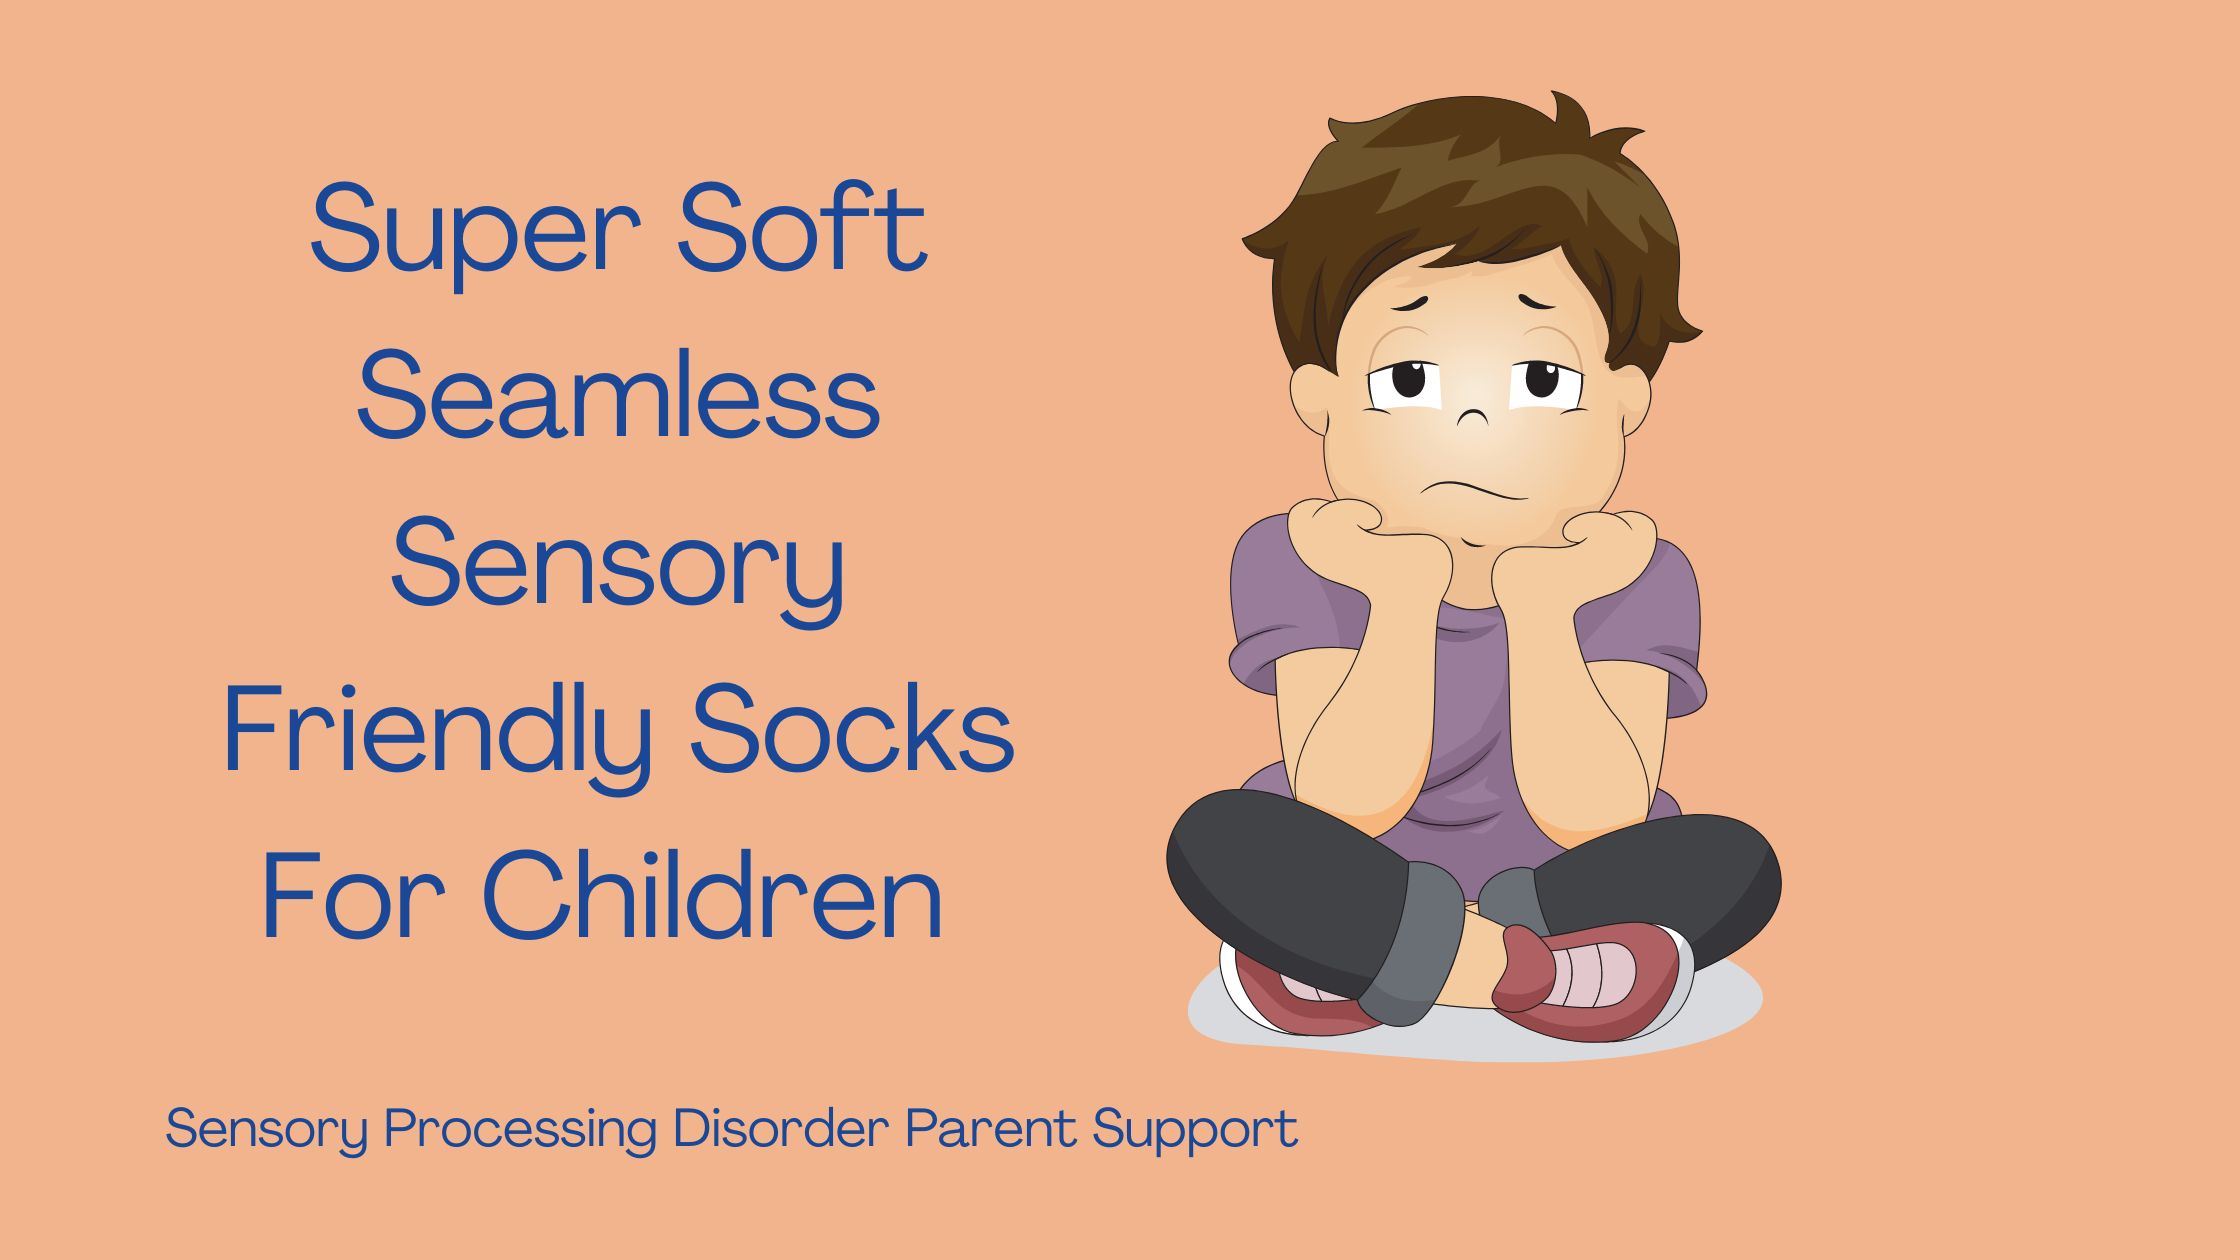 child with sensory processing disorder looking sad Super Soft Seamless Sensory Friendly Socks For Children